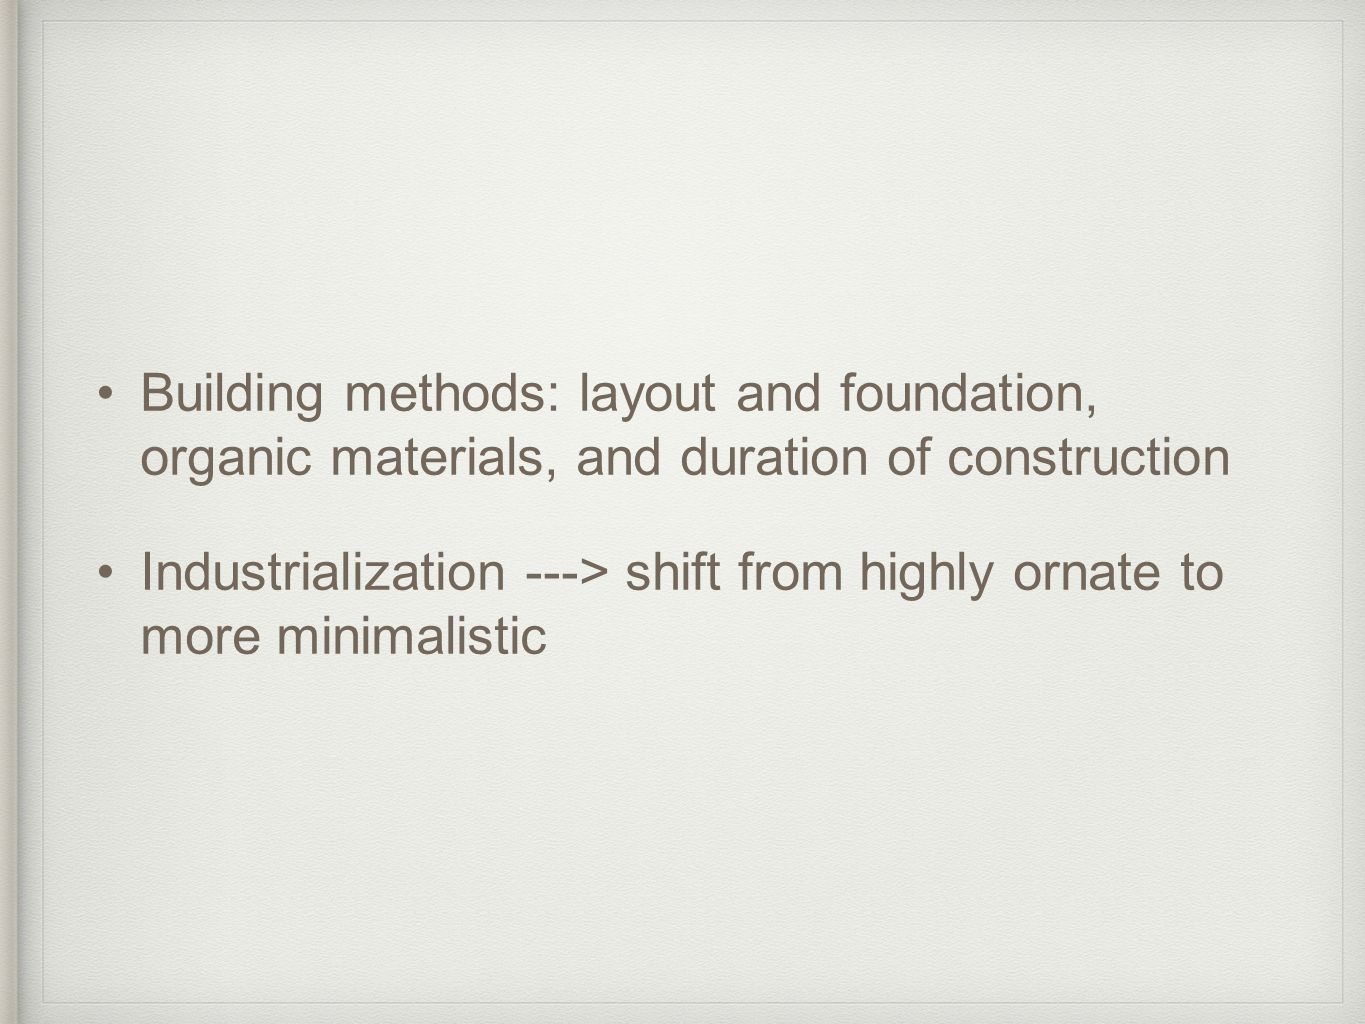 Building methods: layout and foundation, organic materials, and duration of construction